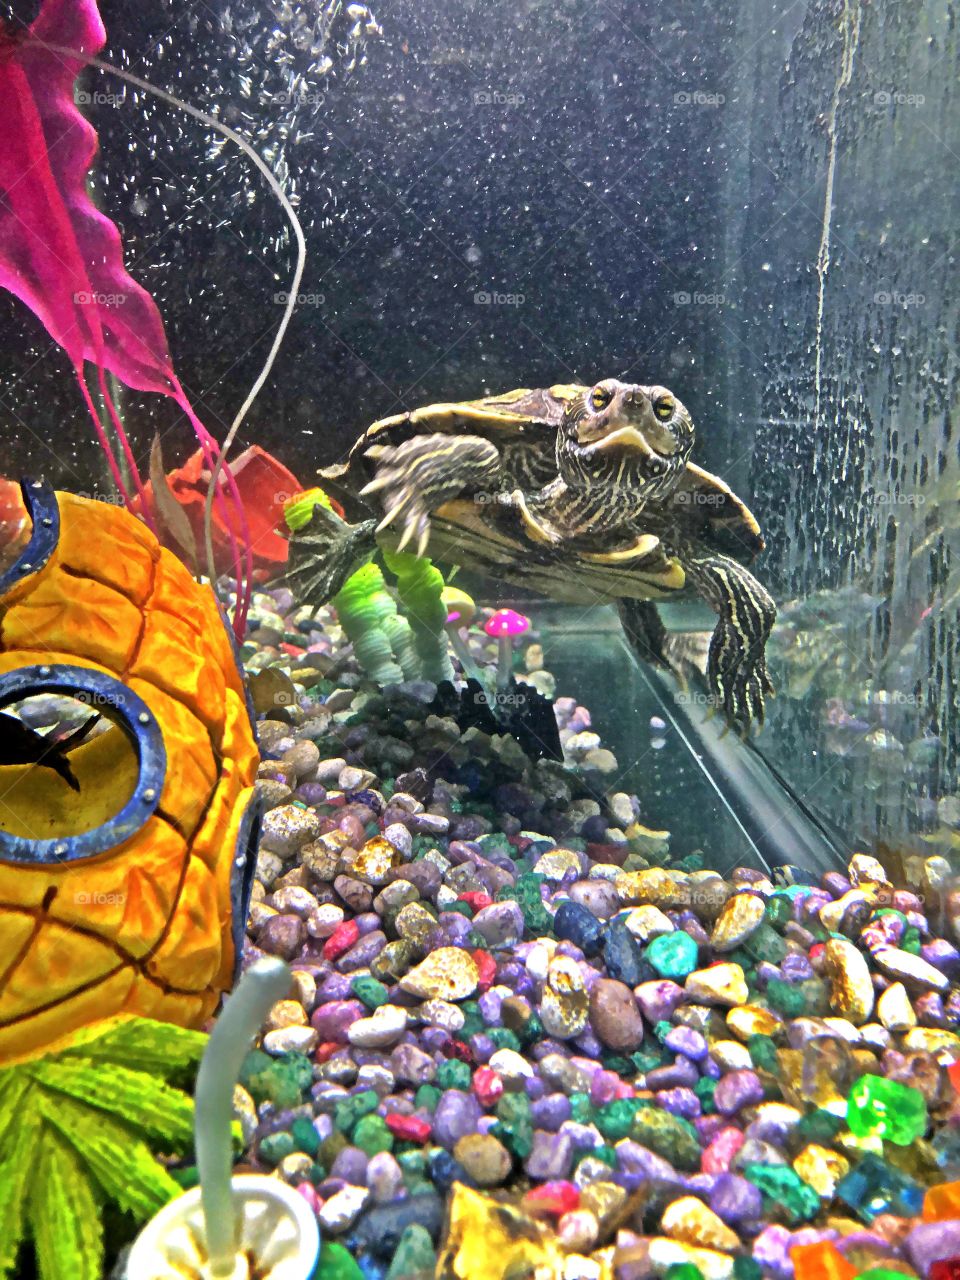 Swimming in her tank